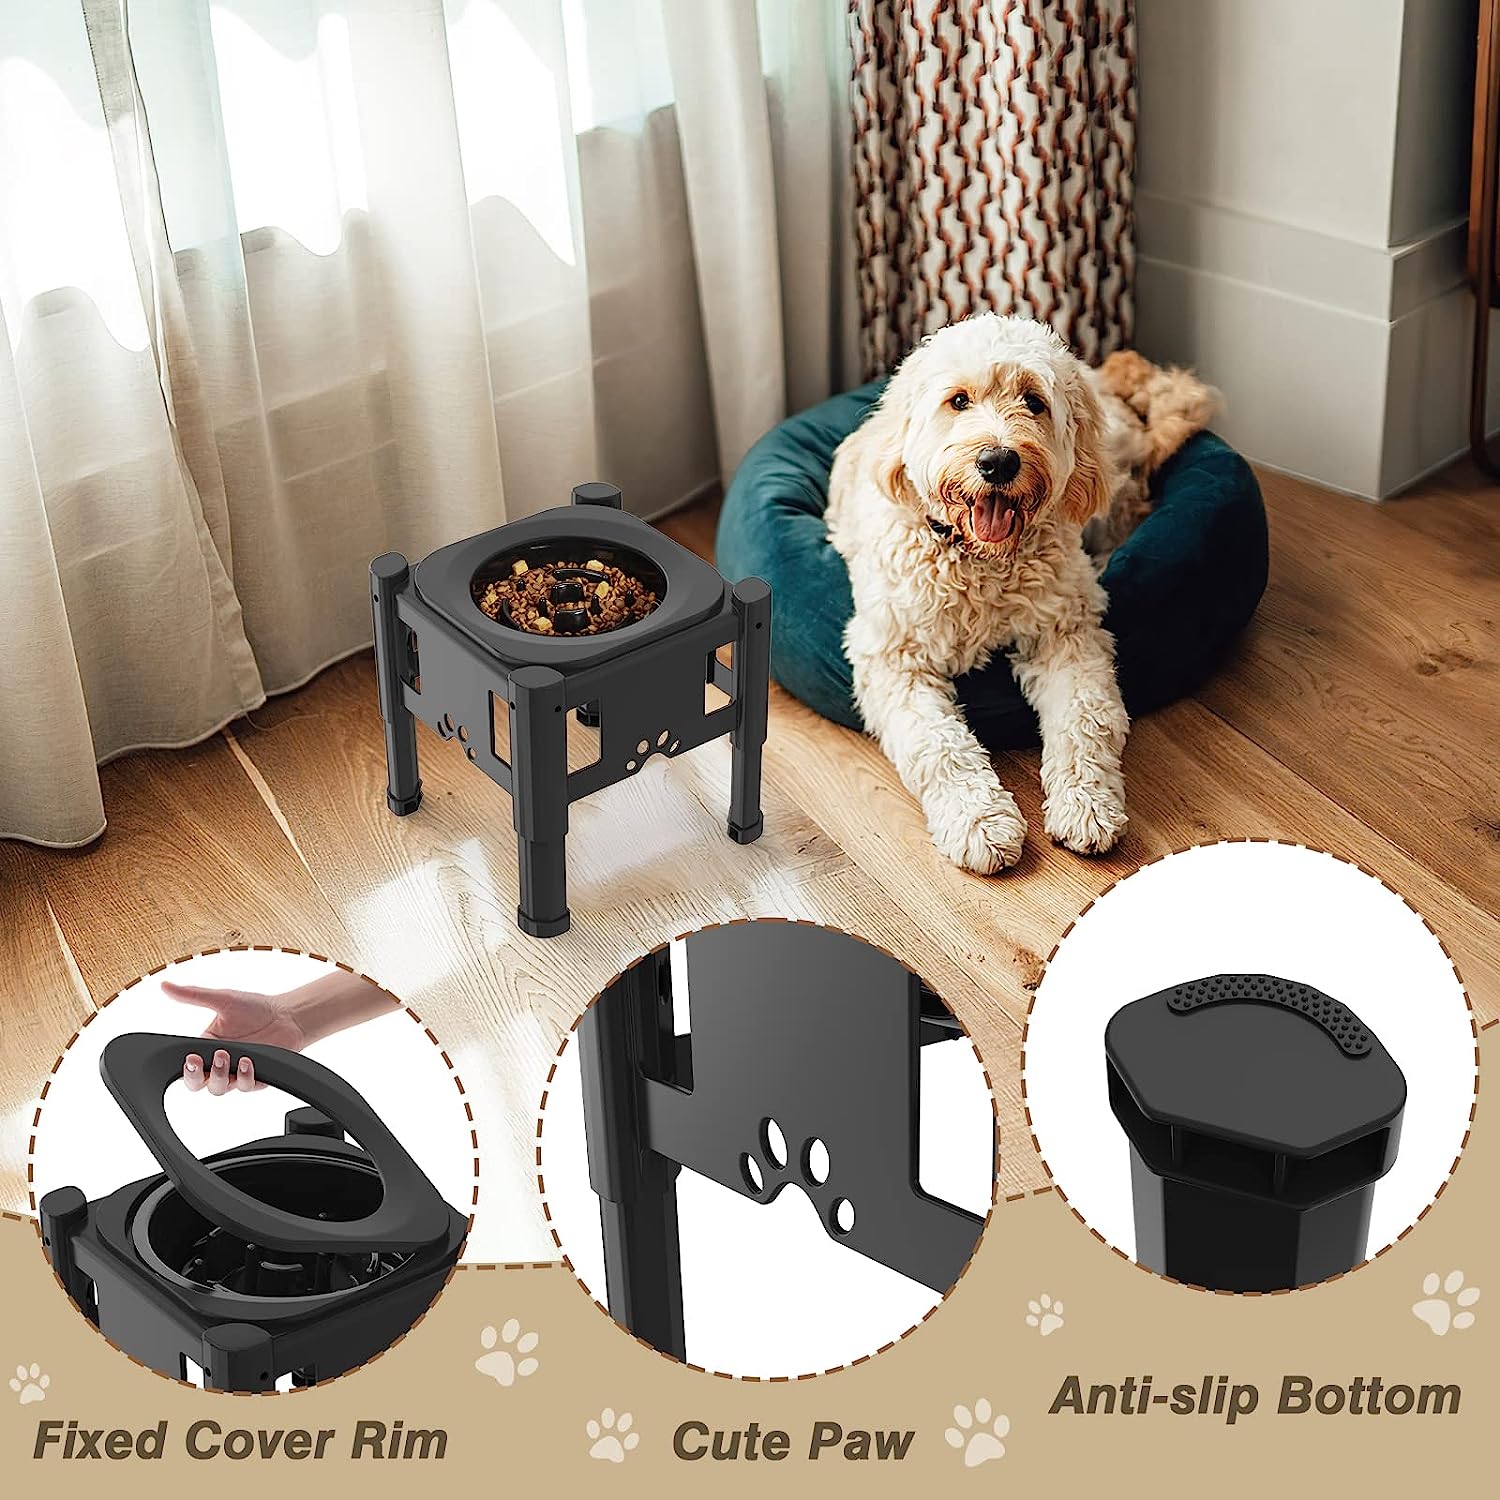 Veehoo Adjustable Elevated Dog Bowls, Raised Dog Dish Stand with 2 Food Bowls & 1 Slow Feeder, Black, Size: 4 Heights: 3.7 in / 9 in / 11 in /12.5 in